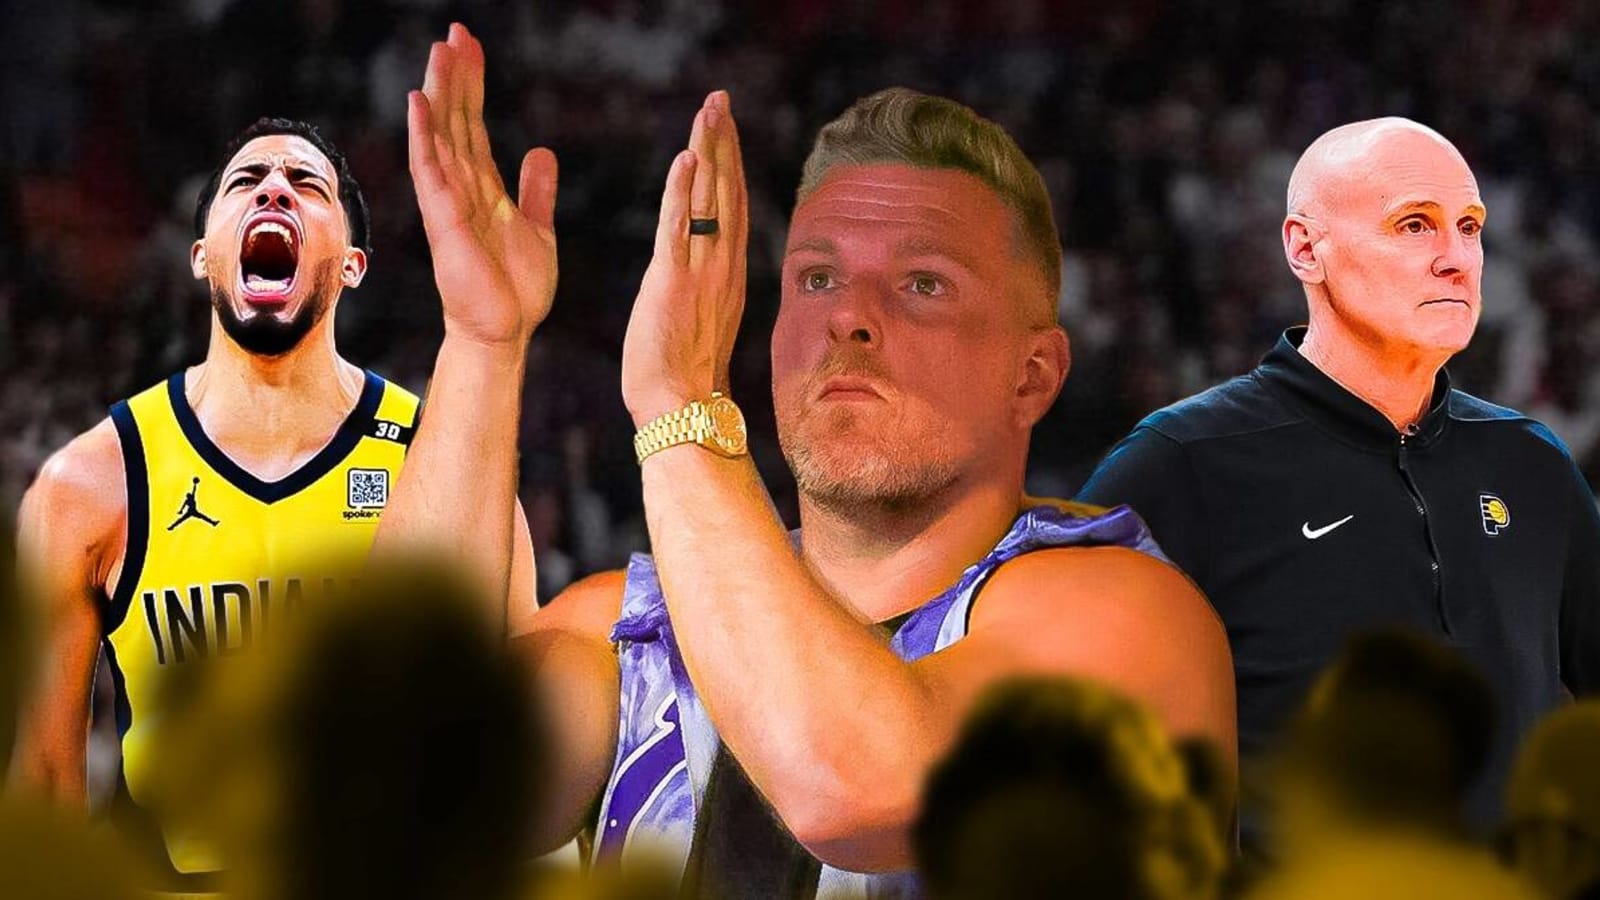 Pat McAfee’s strong message to Pacers’ Rick Carlisle after Game 4 win will trigger Knicks fans